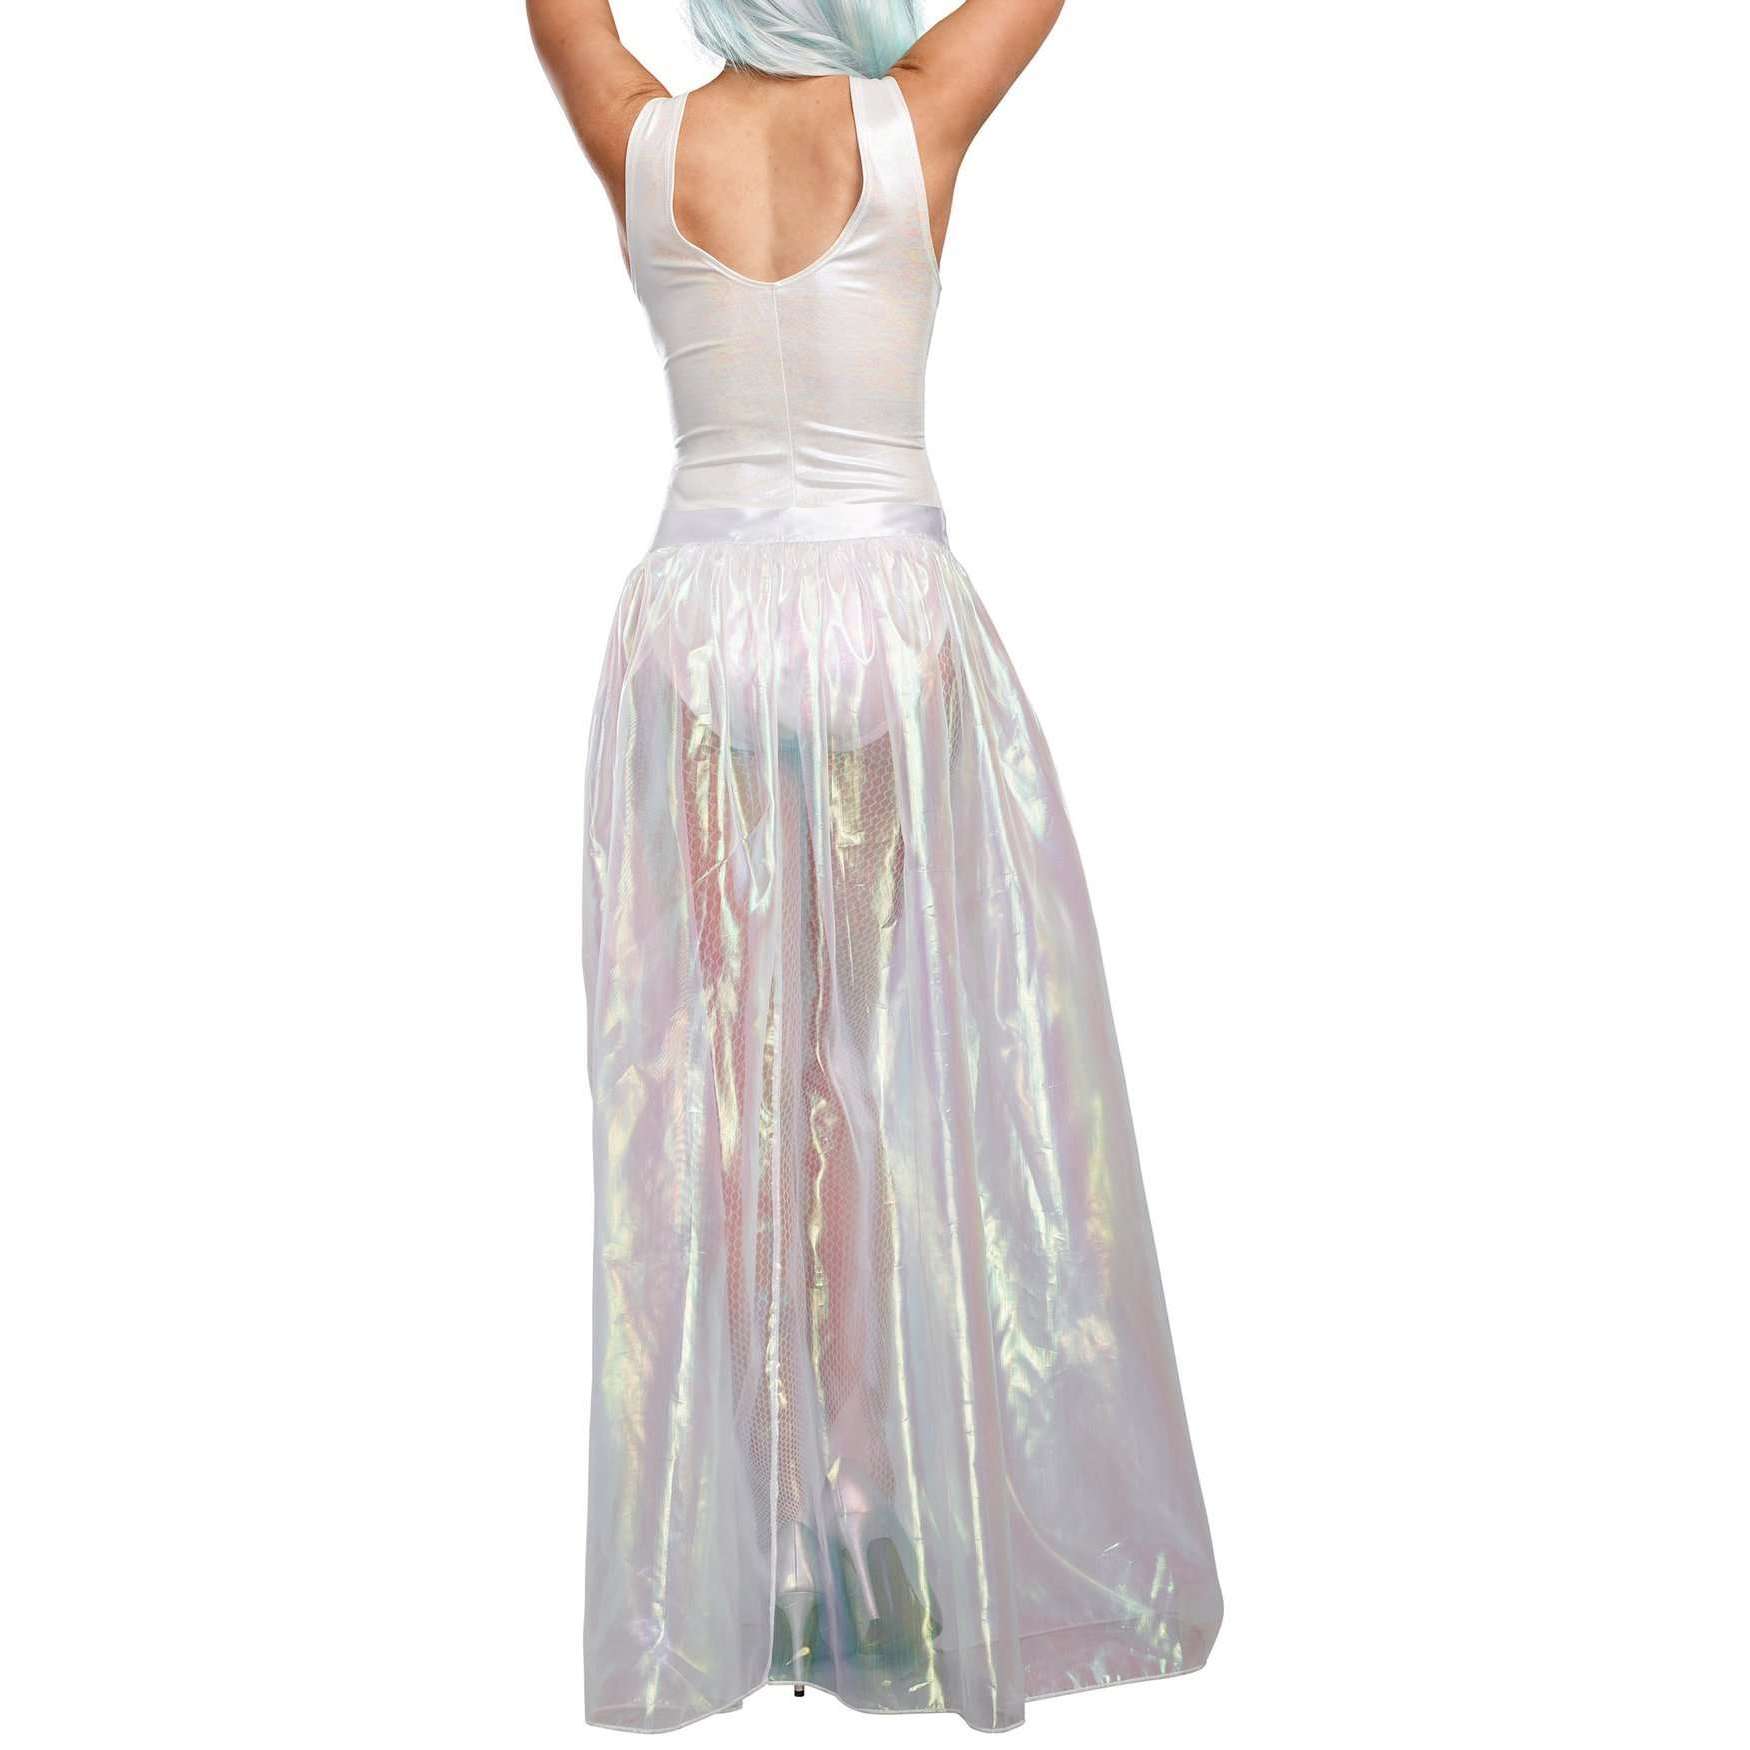 Gorgeous Iridescent Holographic Adult Skirt